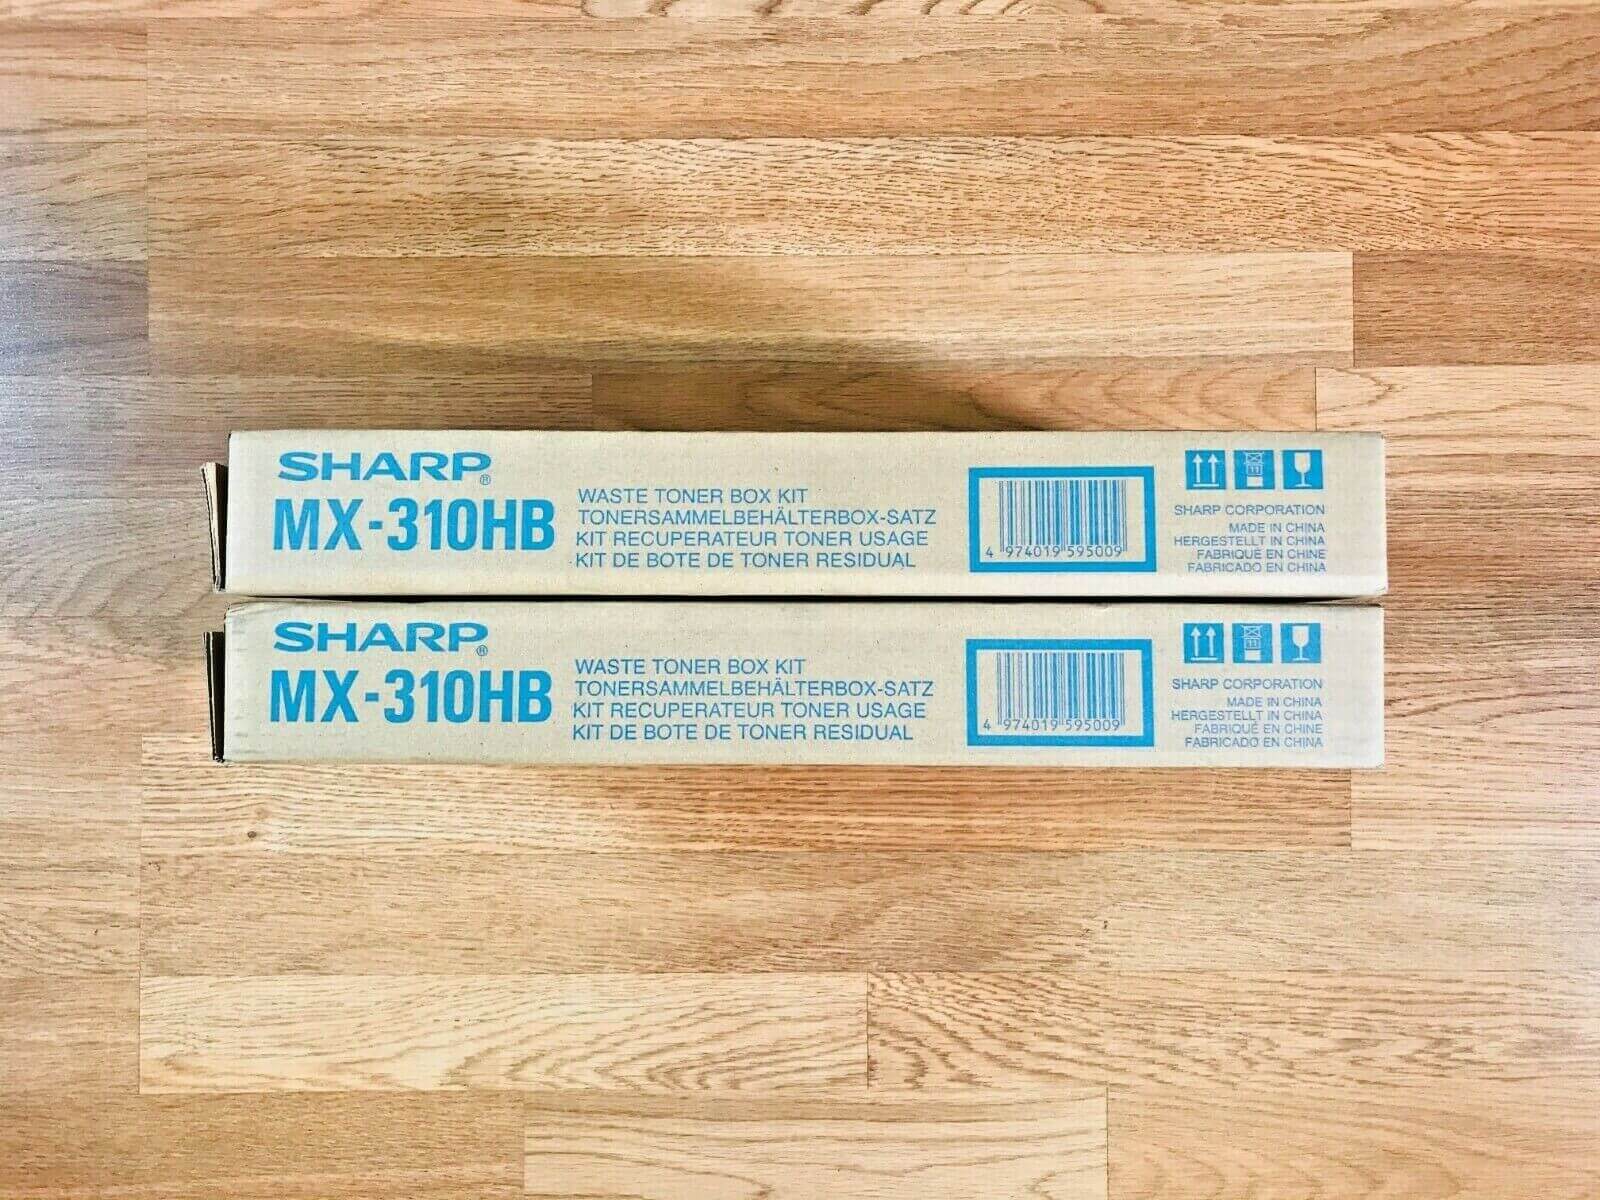 Lot Of 2 Sharp MX-310HB Waste Toner Box Kits With Same Day Shipping Available!!! - copier-clearance-center